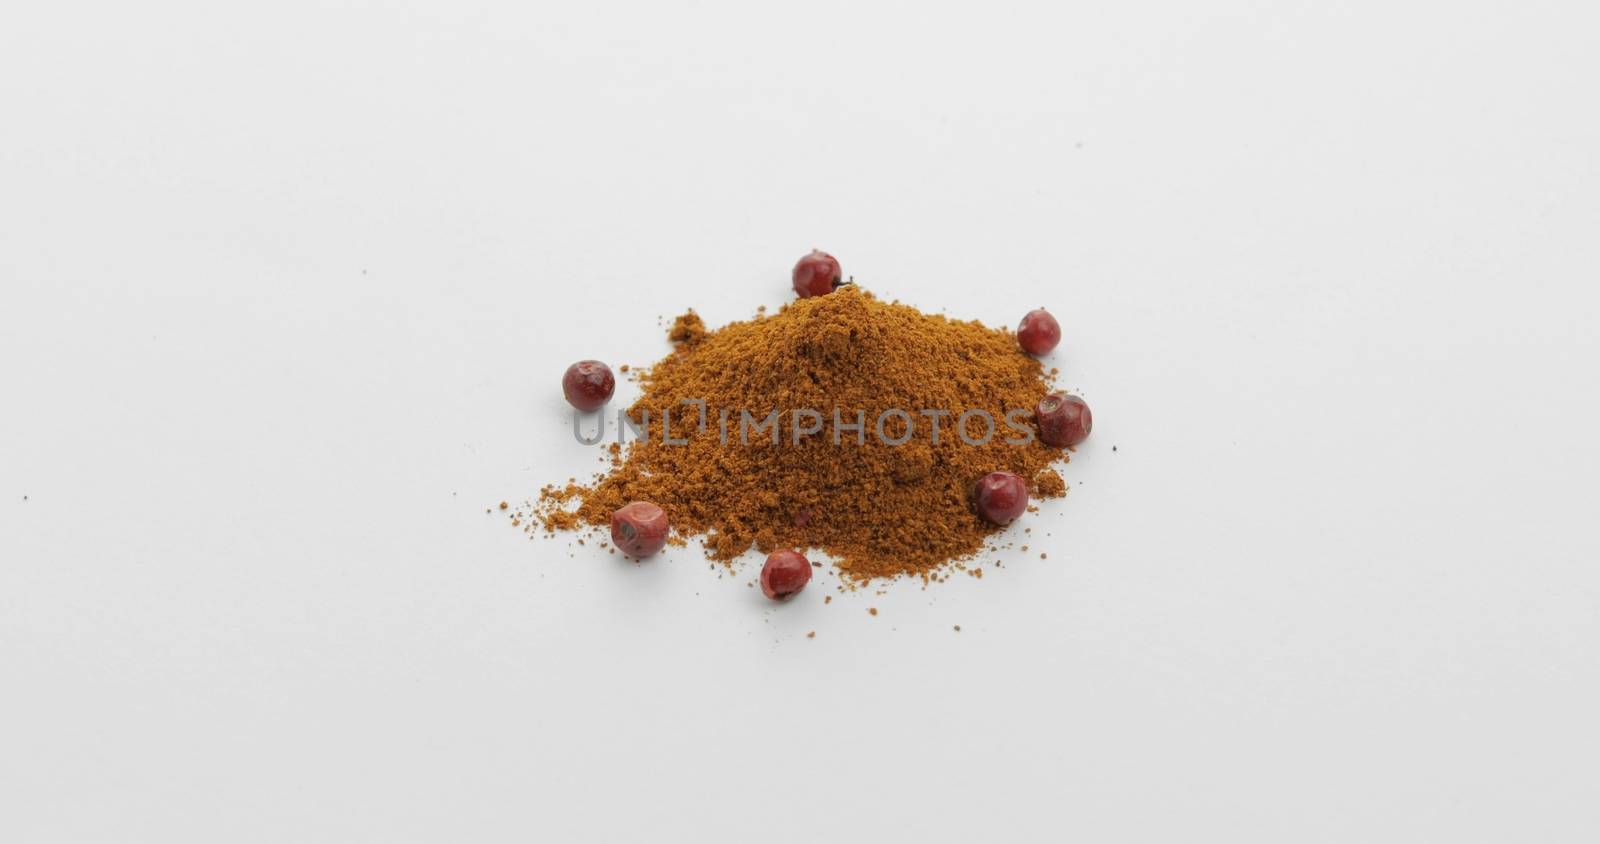 Red pepper powder. Red herbal spice, aromatic seasoning for food preparation and cooking, macro shot against a white background